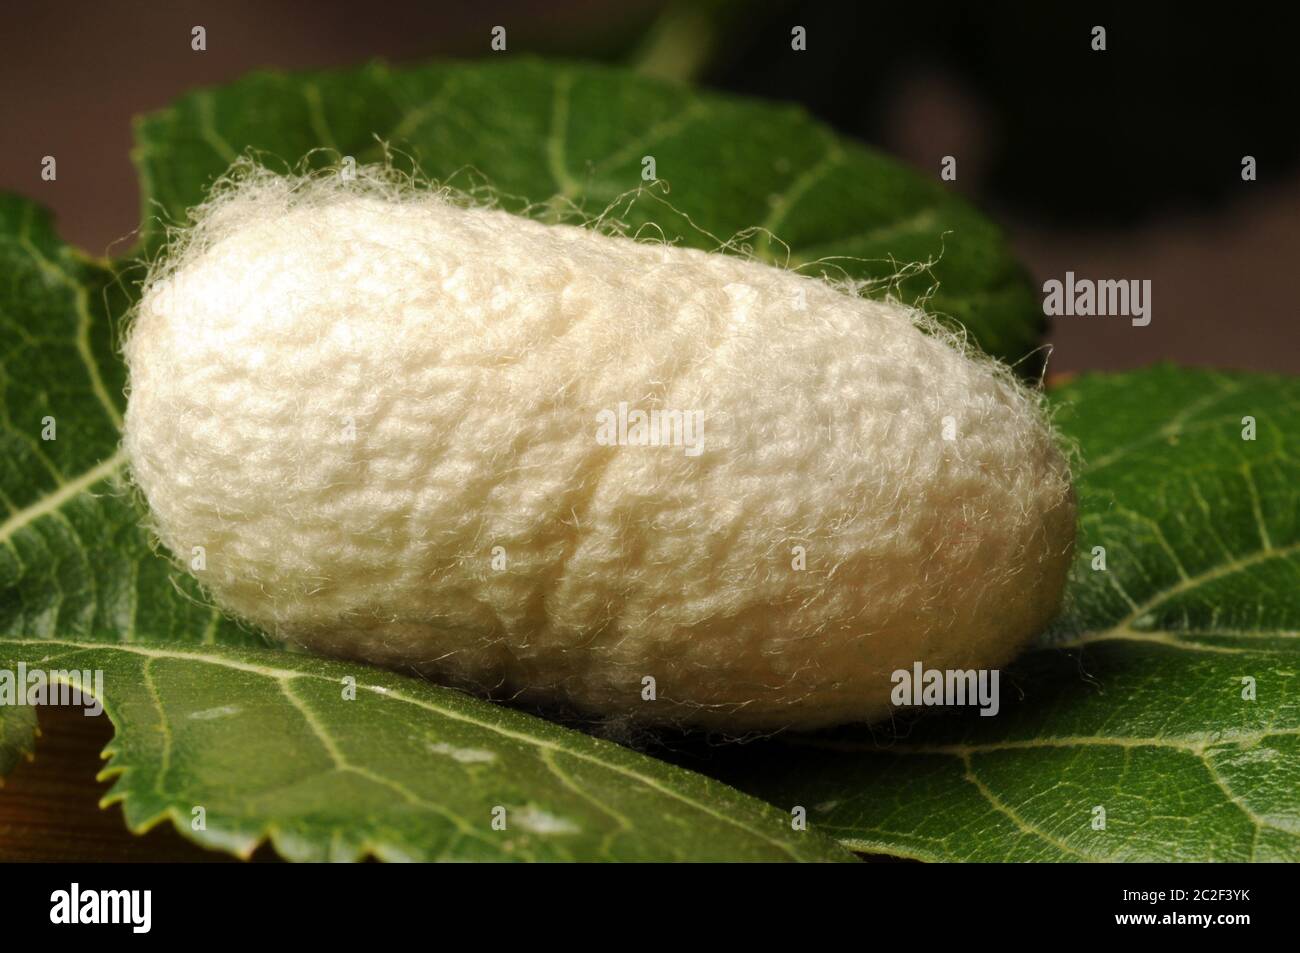 Cocoon of B. mori on mulberry leaf Stock Photo